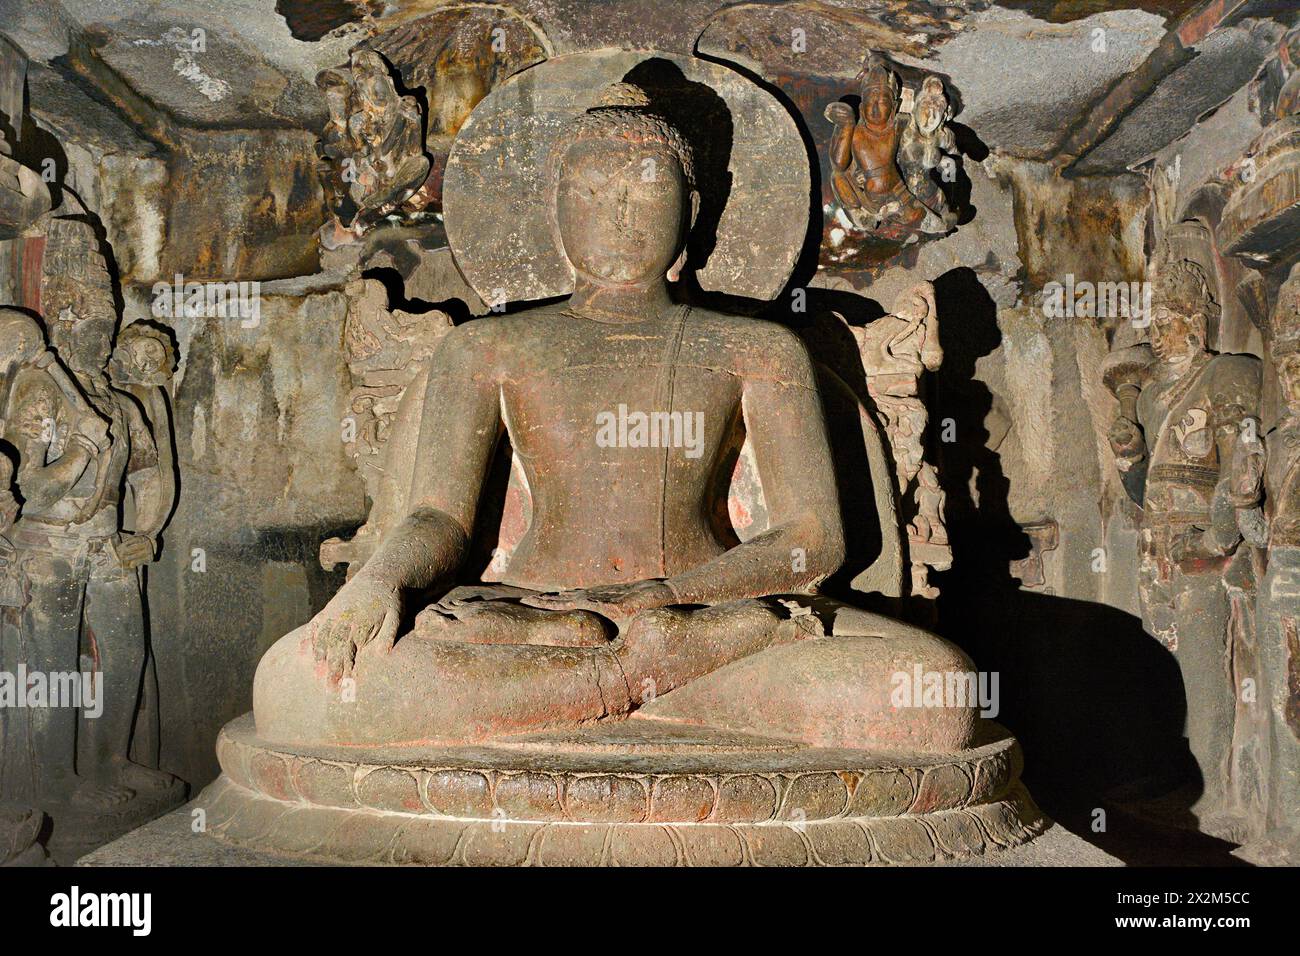 Ellora Buddhist Caves: Cave No 12. Third floor. Seated Buddha, main shrine - Second floor. The main shrine huge seated Buddha with the earth-touching Stock Photo